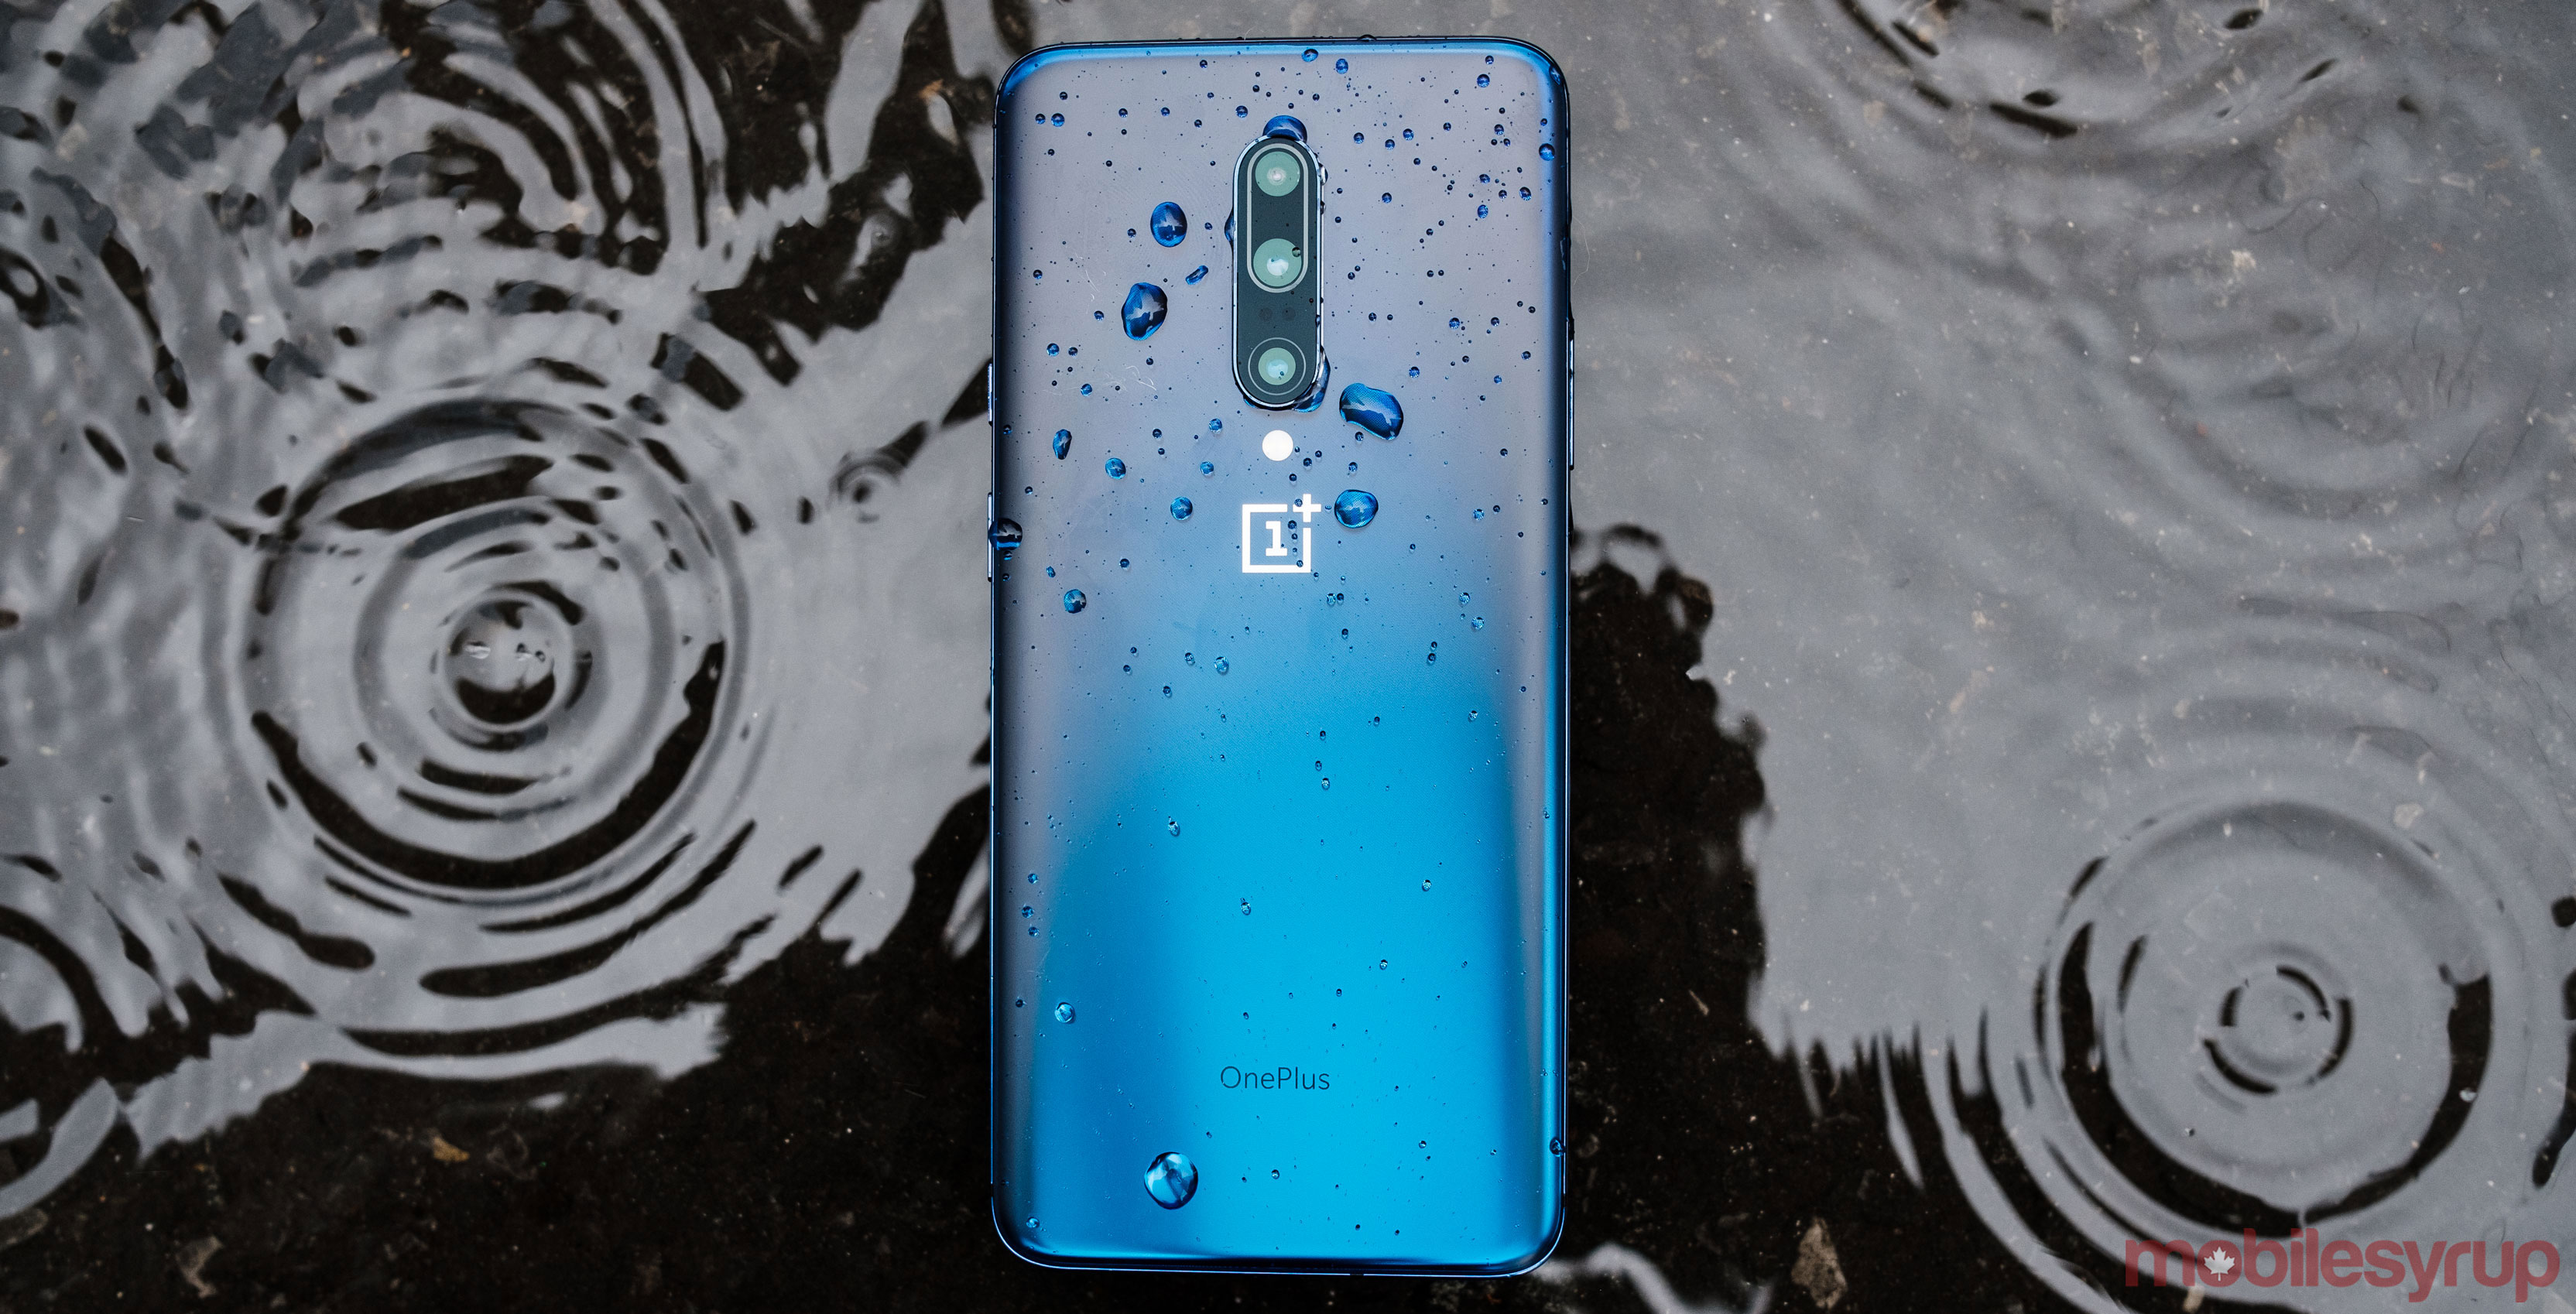 OnePlus 7 Pro Review: One for the fans